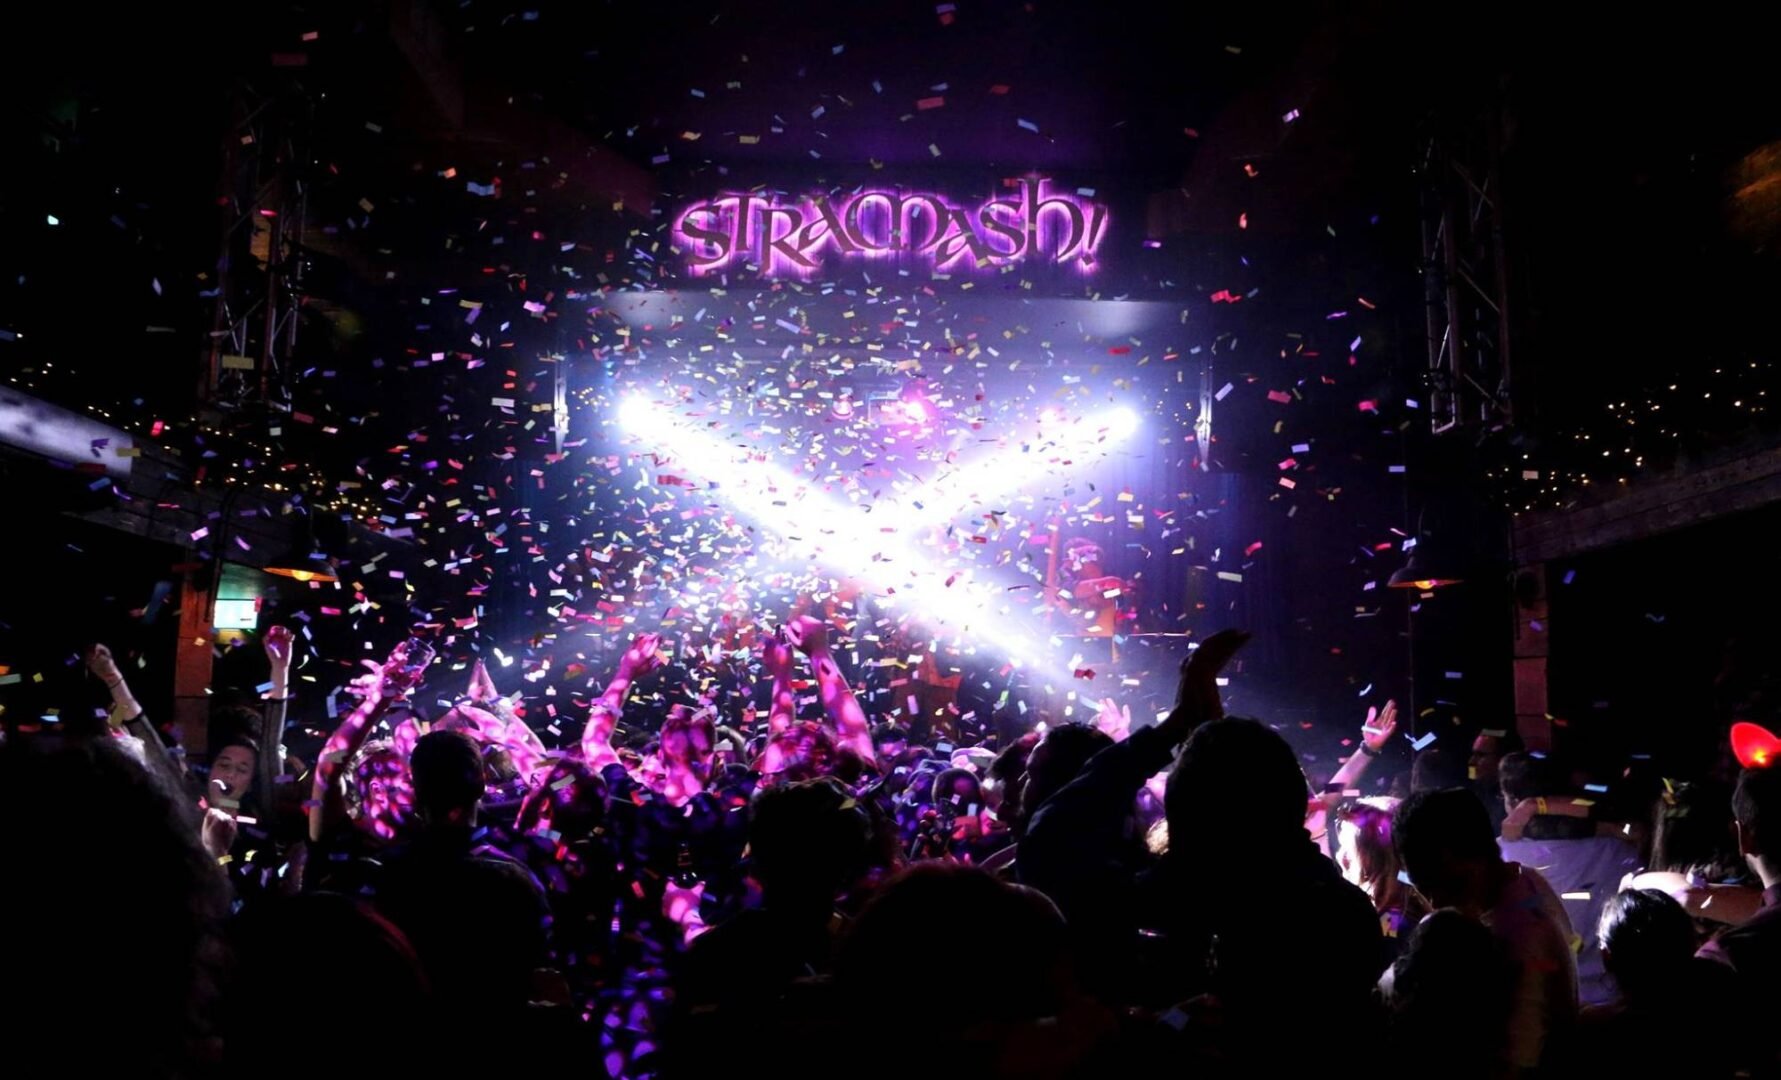 Stramash stage lit with white cross lights.  Confetti falling and crowd hands in air., Stramash